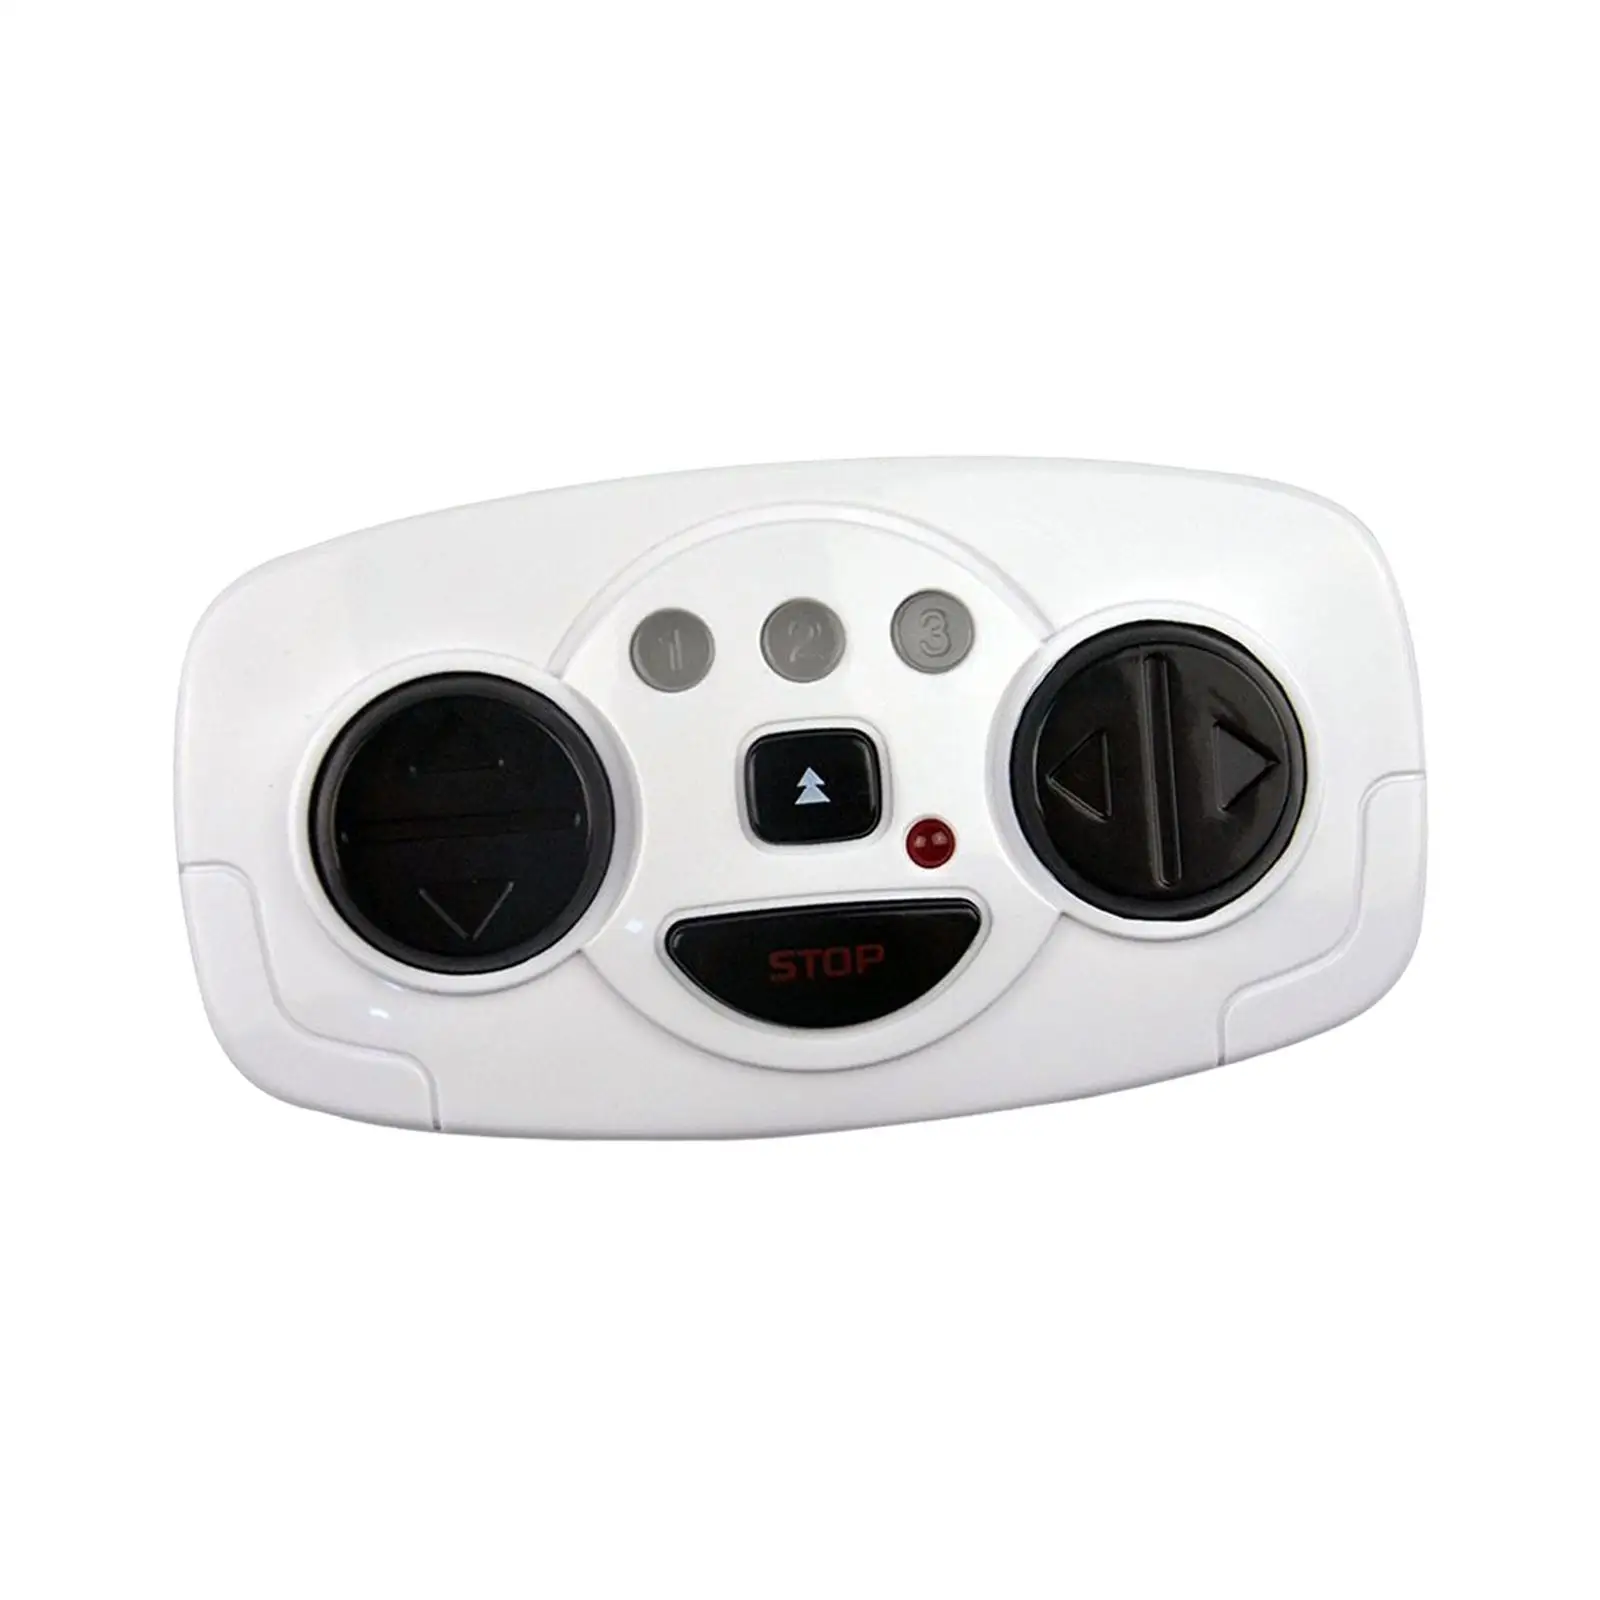 Practical Remote Controller Reliable Repair Parts for Kids RC Model Vehicles